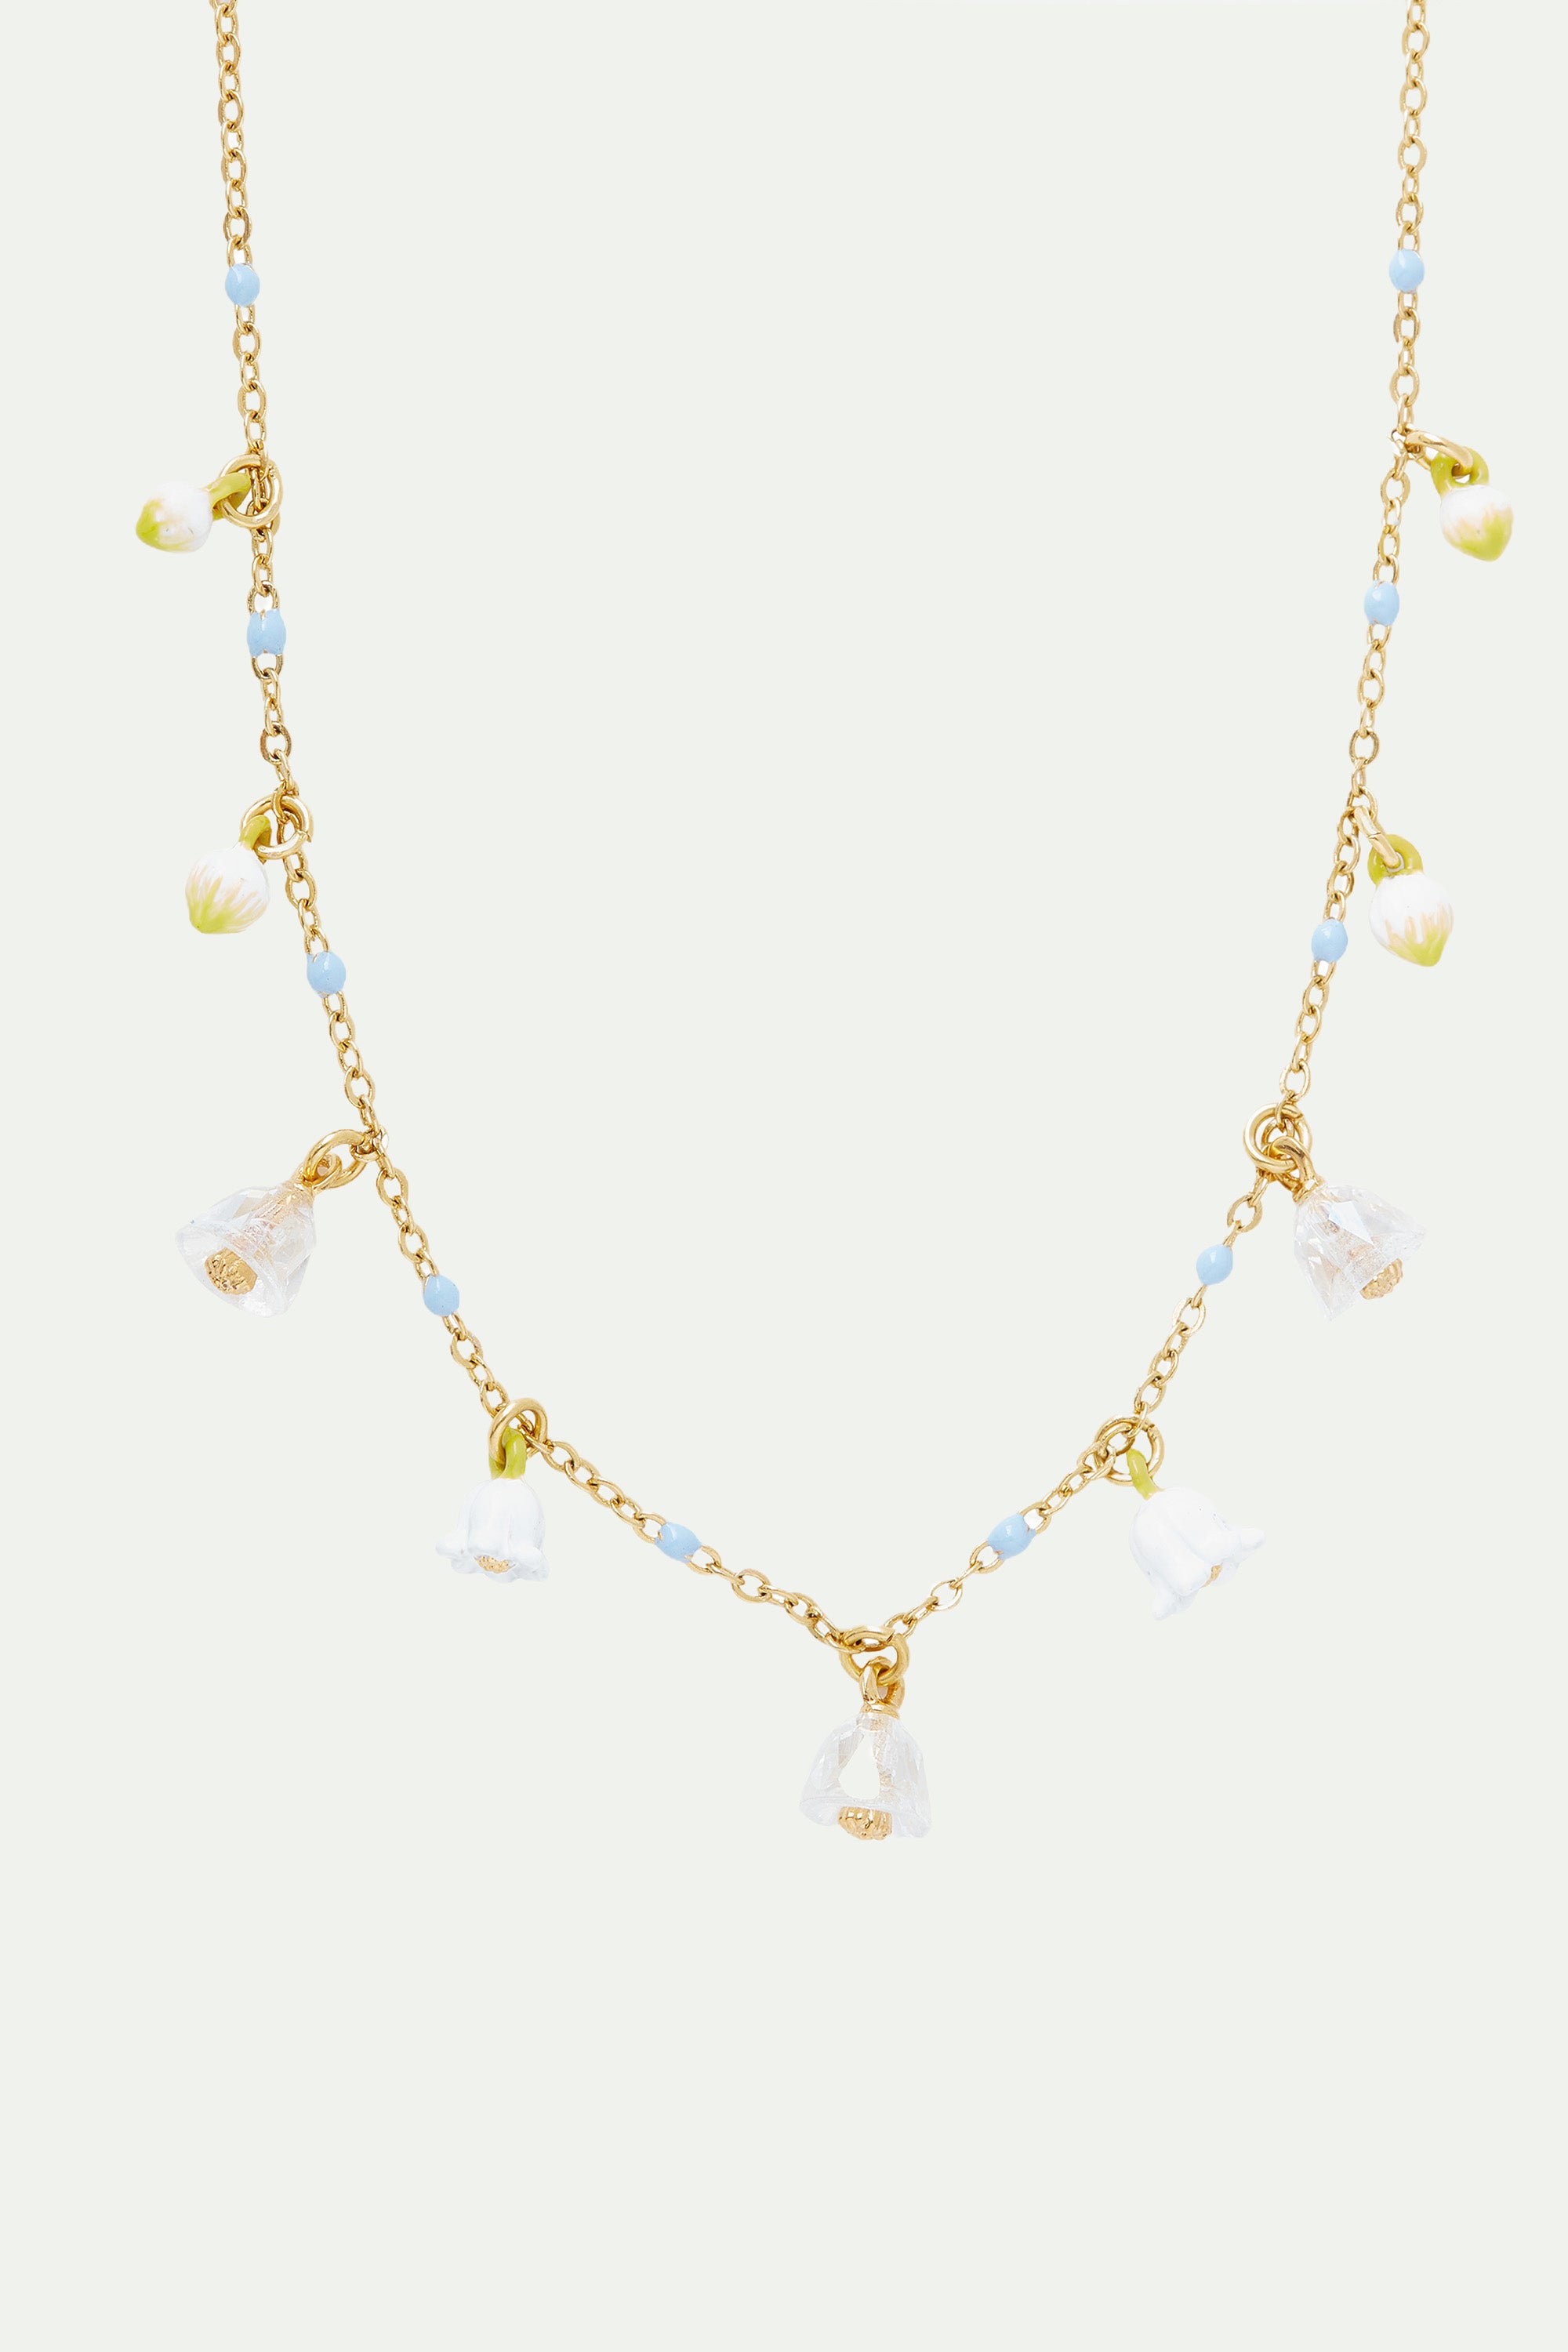 Lily of the valley bells pendant necklace